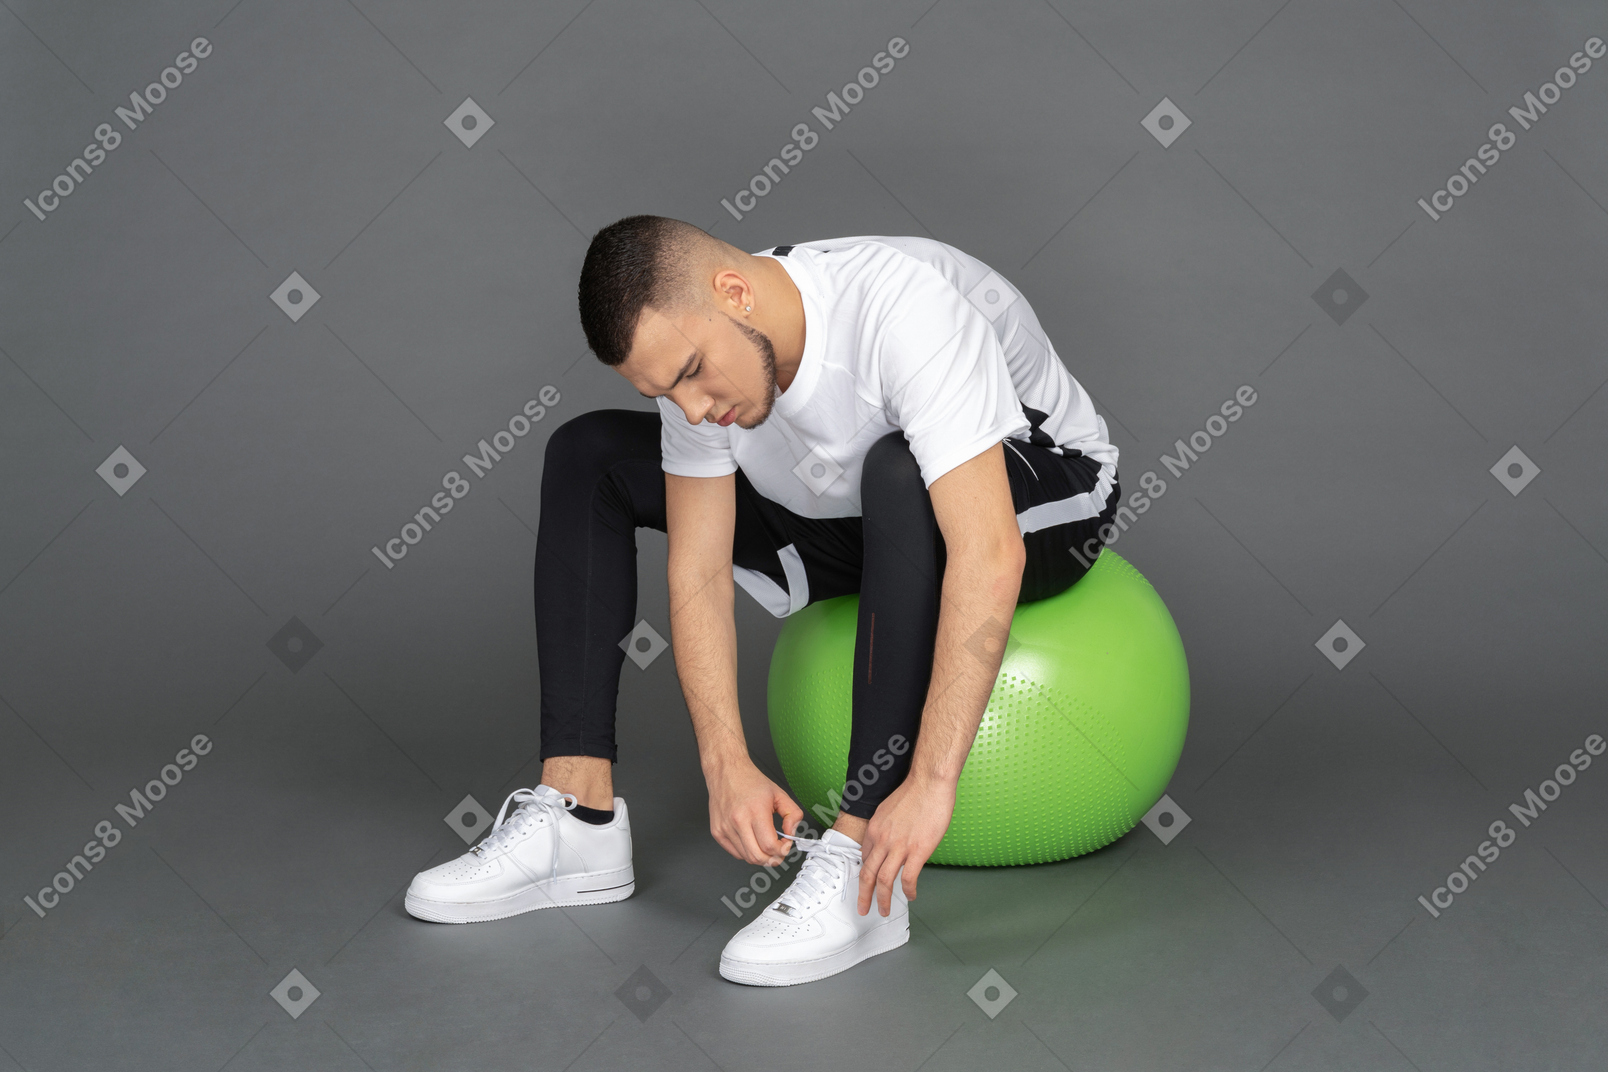 Man sitting on a fitball